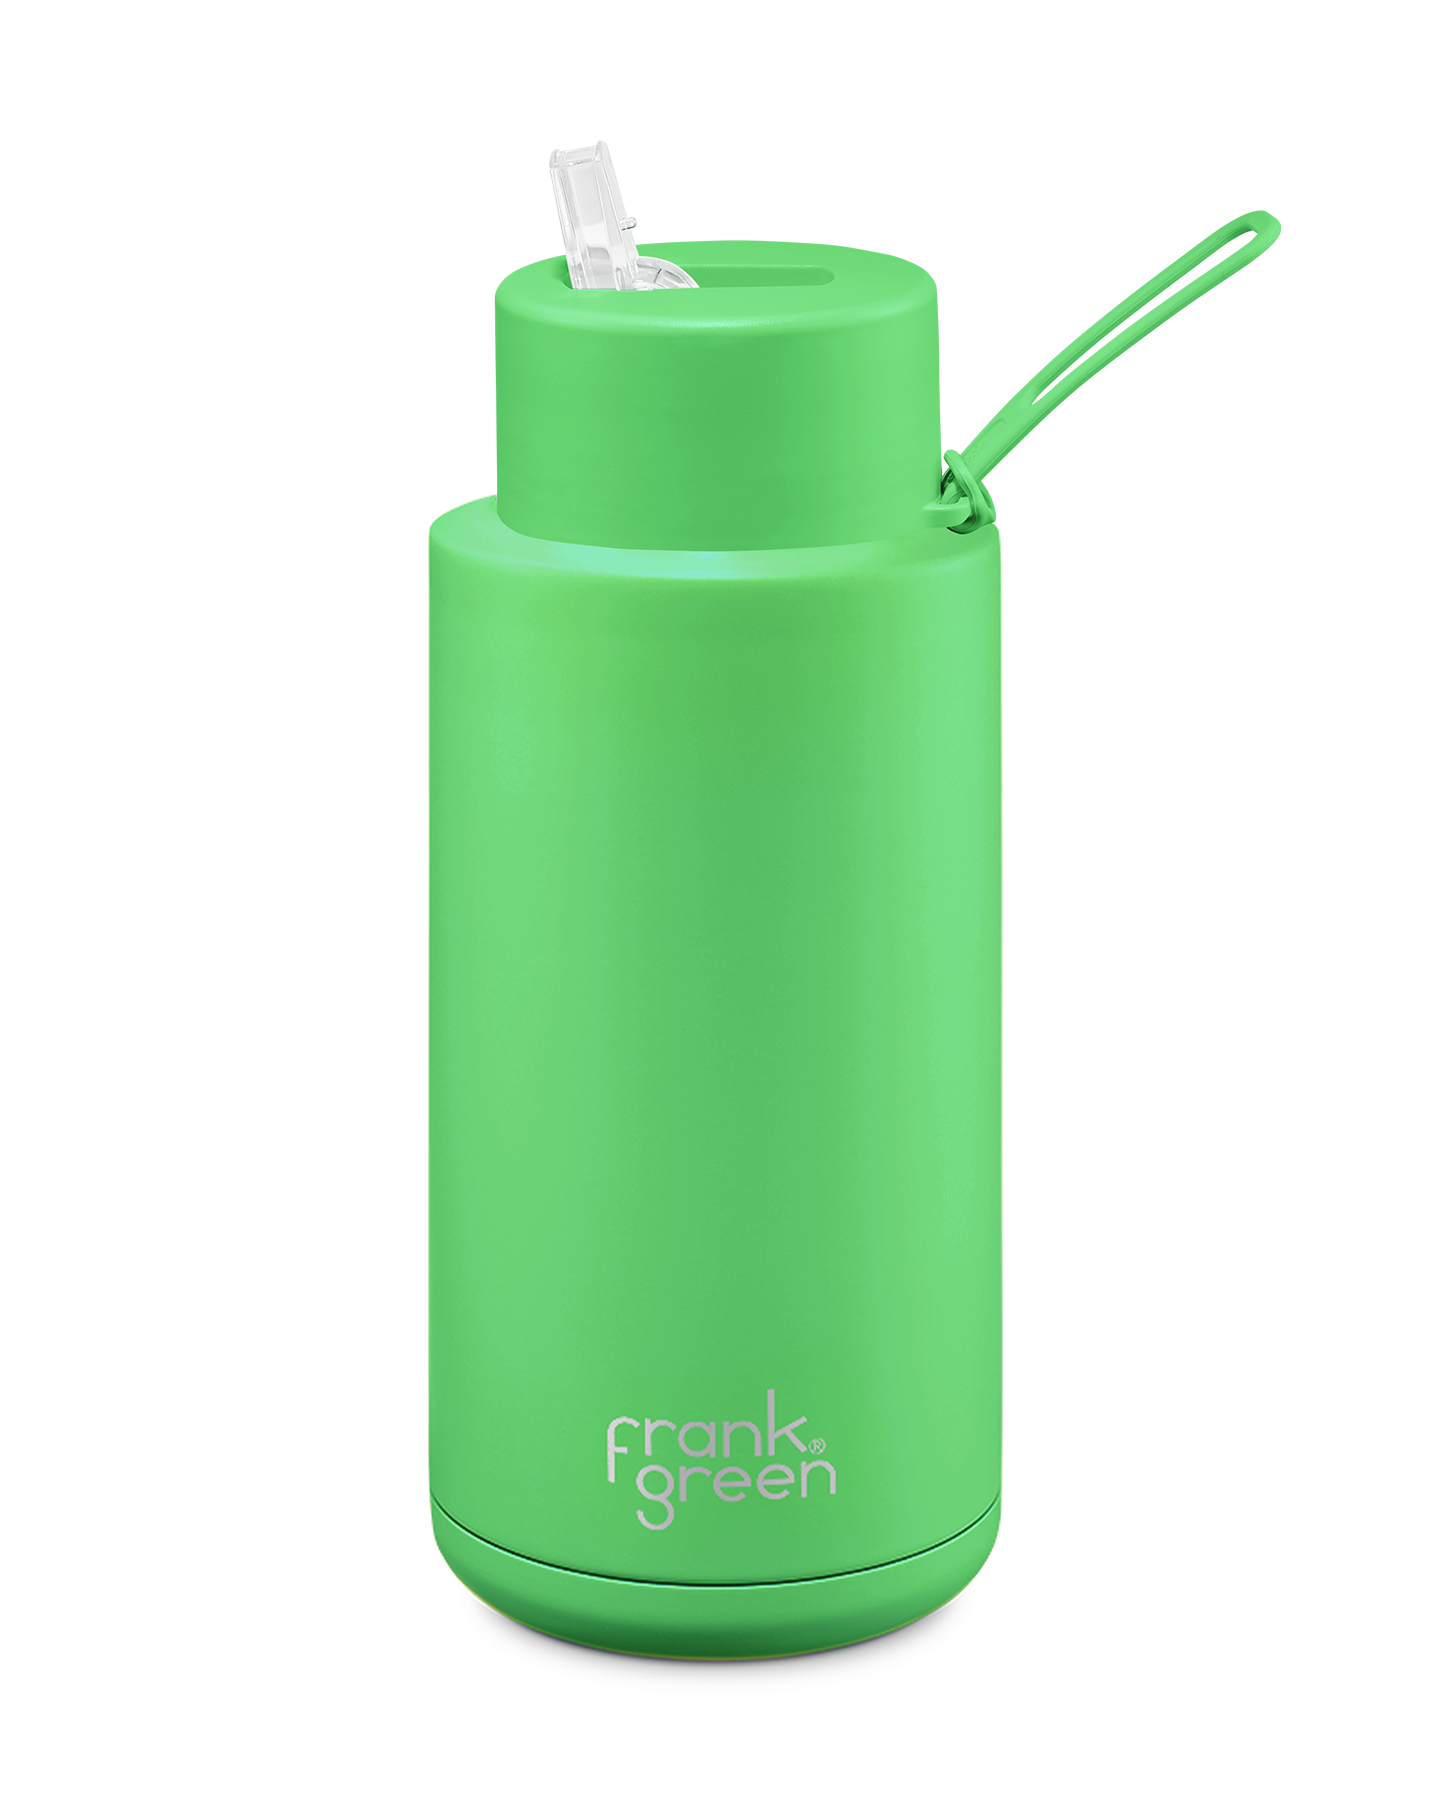 FRANK GREEN CERAMIC REUSABLE BOTTLE 34oz/1 LITRE WITH STRAW LID - NEON GREEN